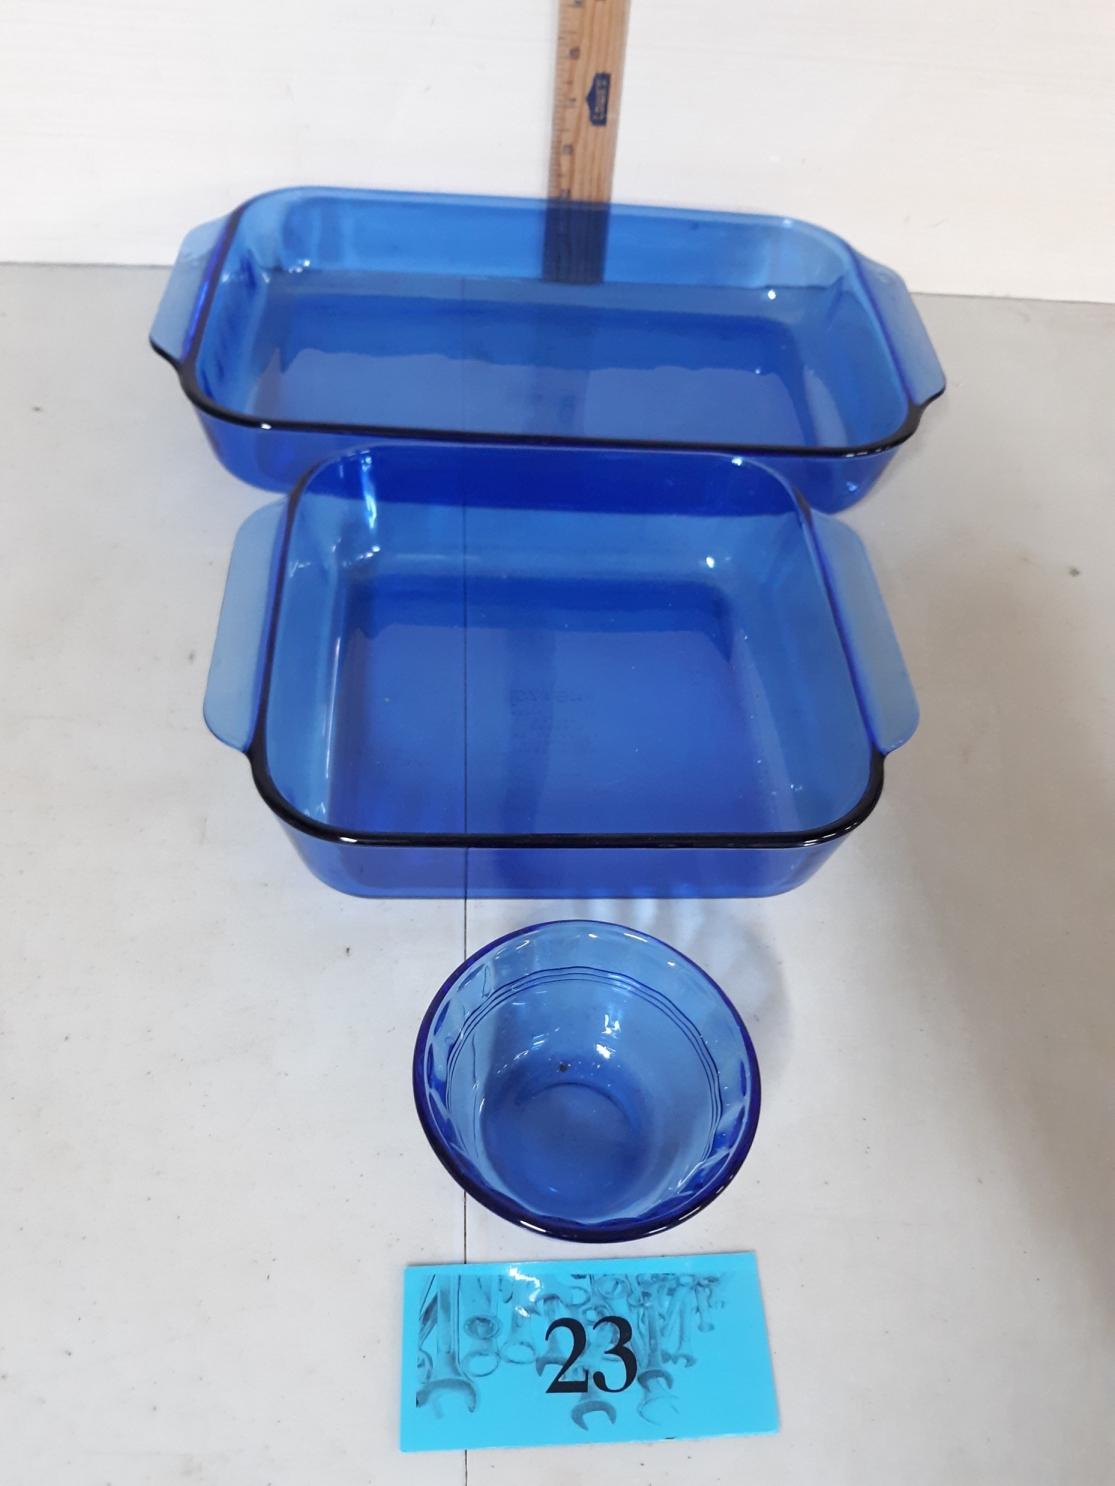 Blue Pyres Dishes, Qty 3